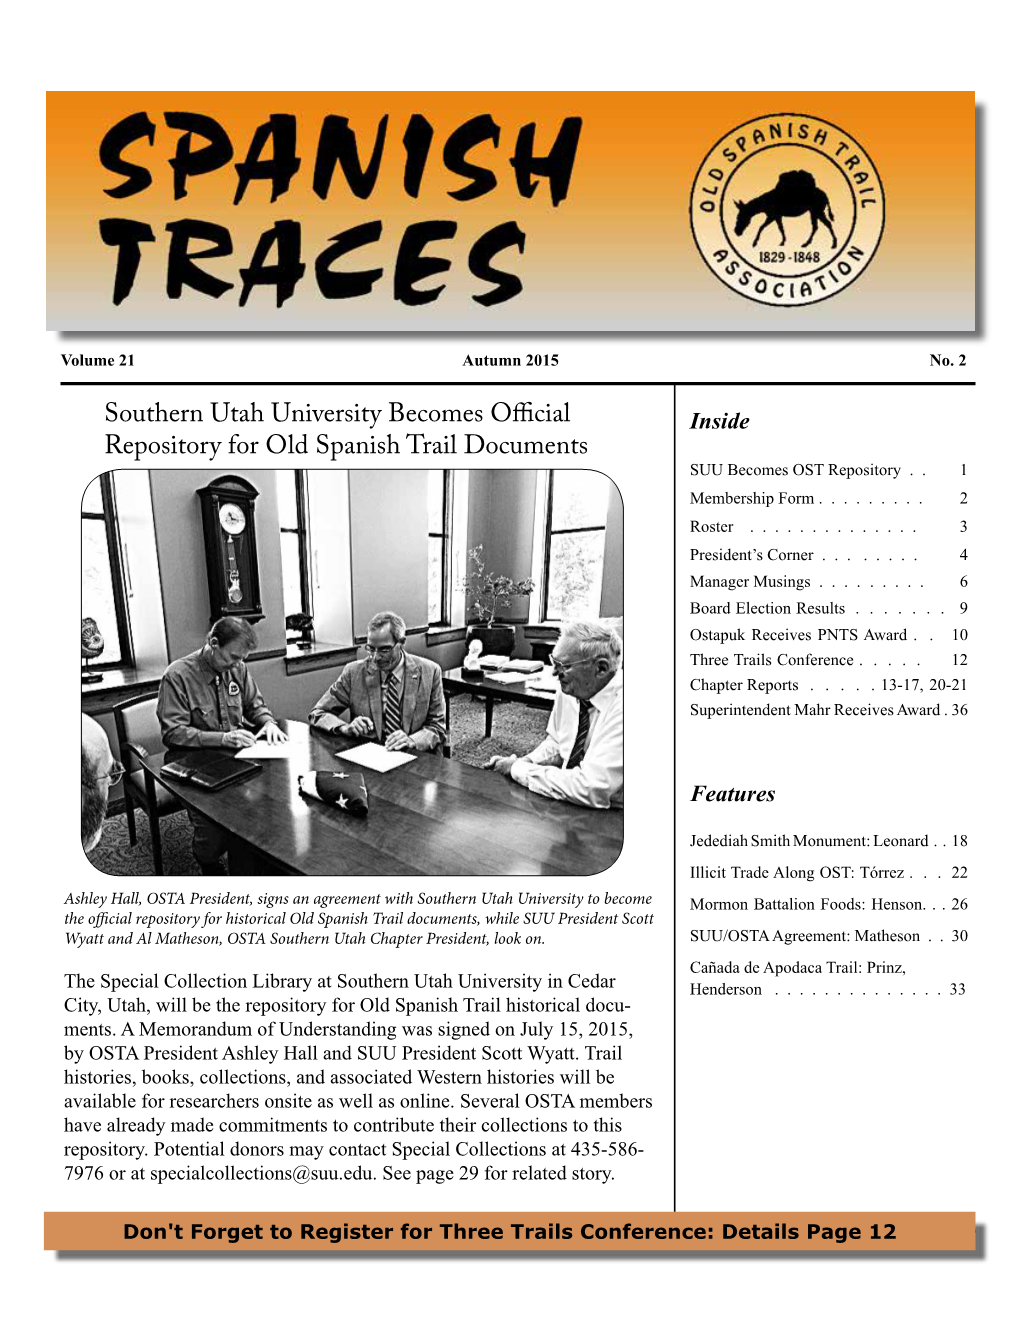 Southern Utah University Becomes Official Repository for Old Spanish